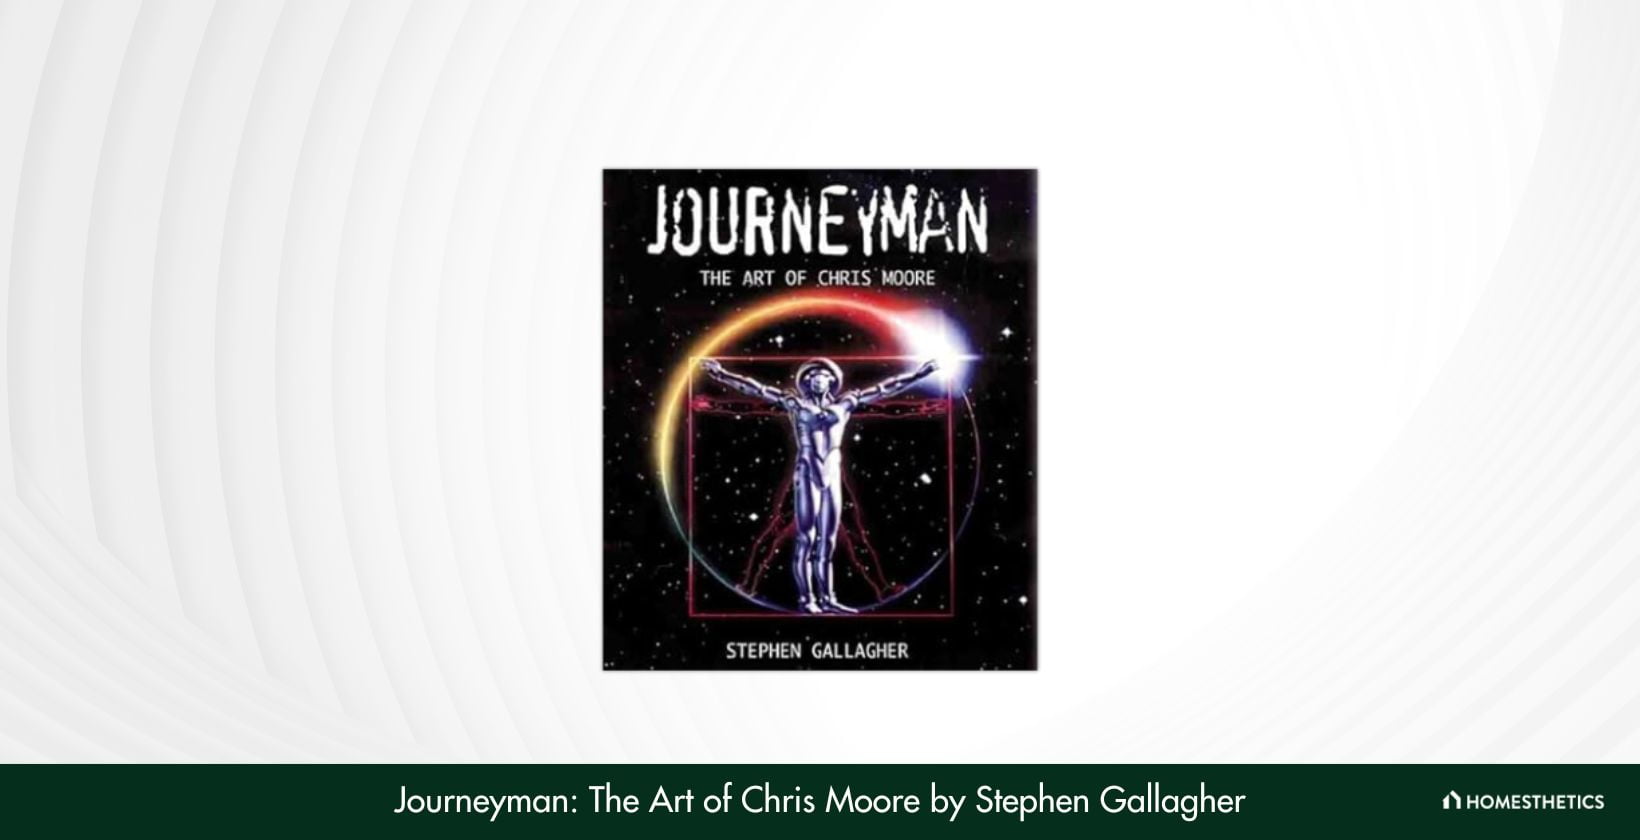 Journeyman The Art of Chris Moore by Stephen Gallagher